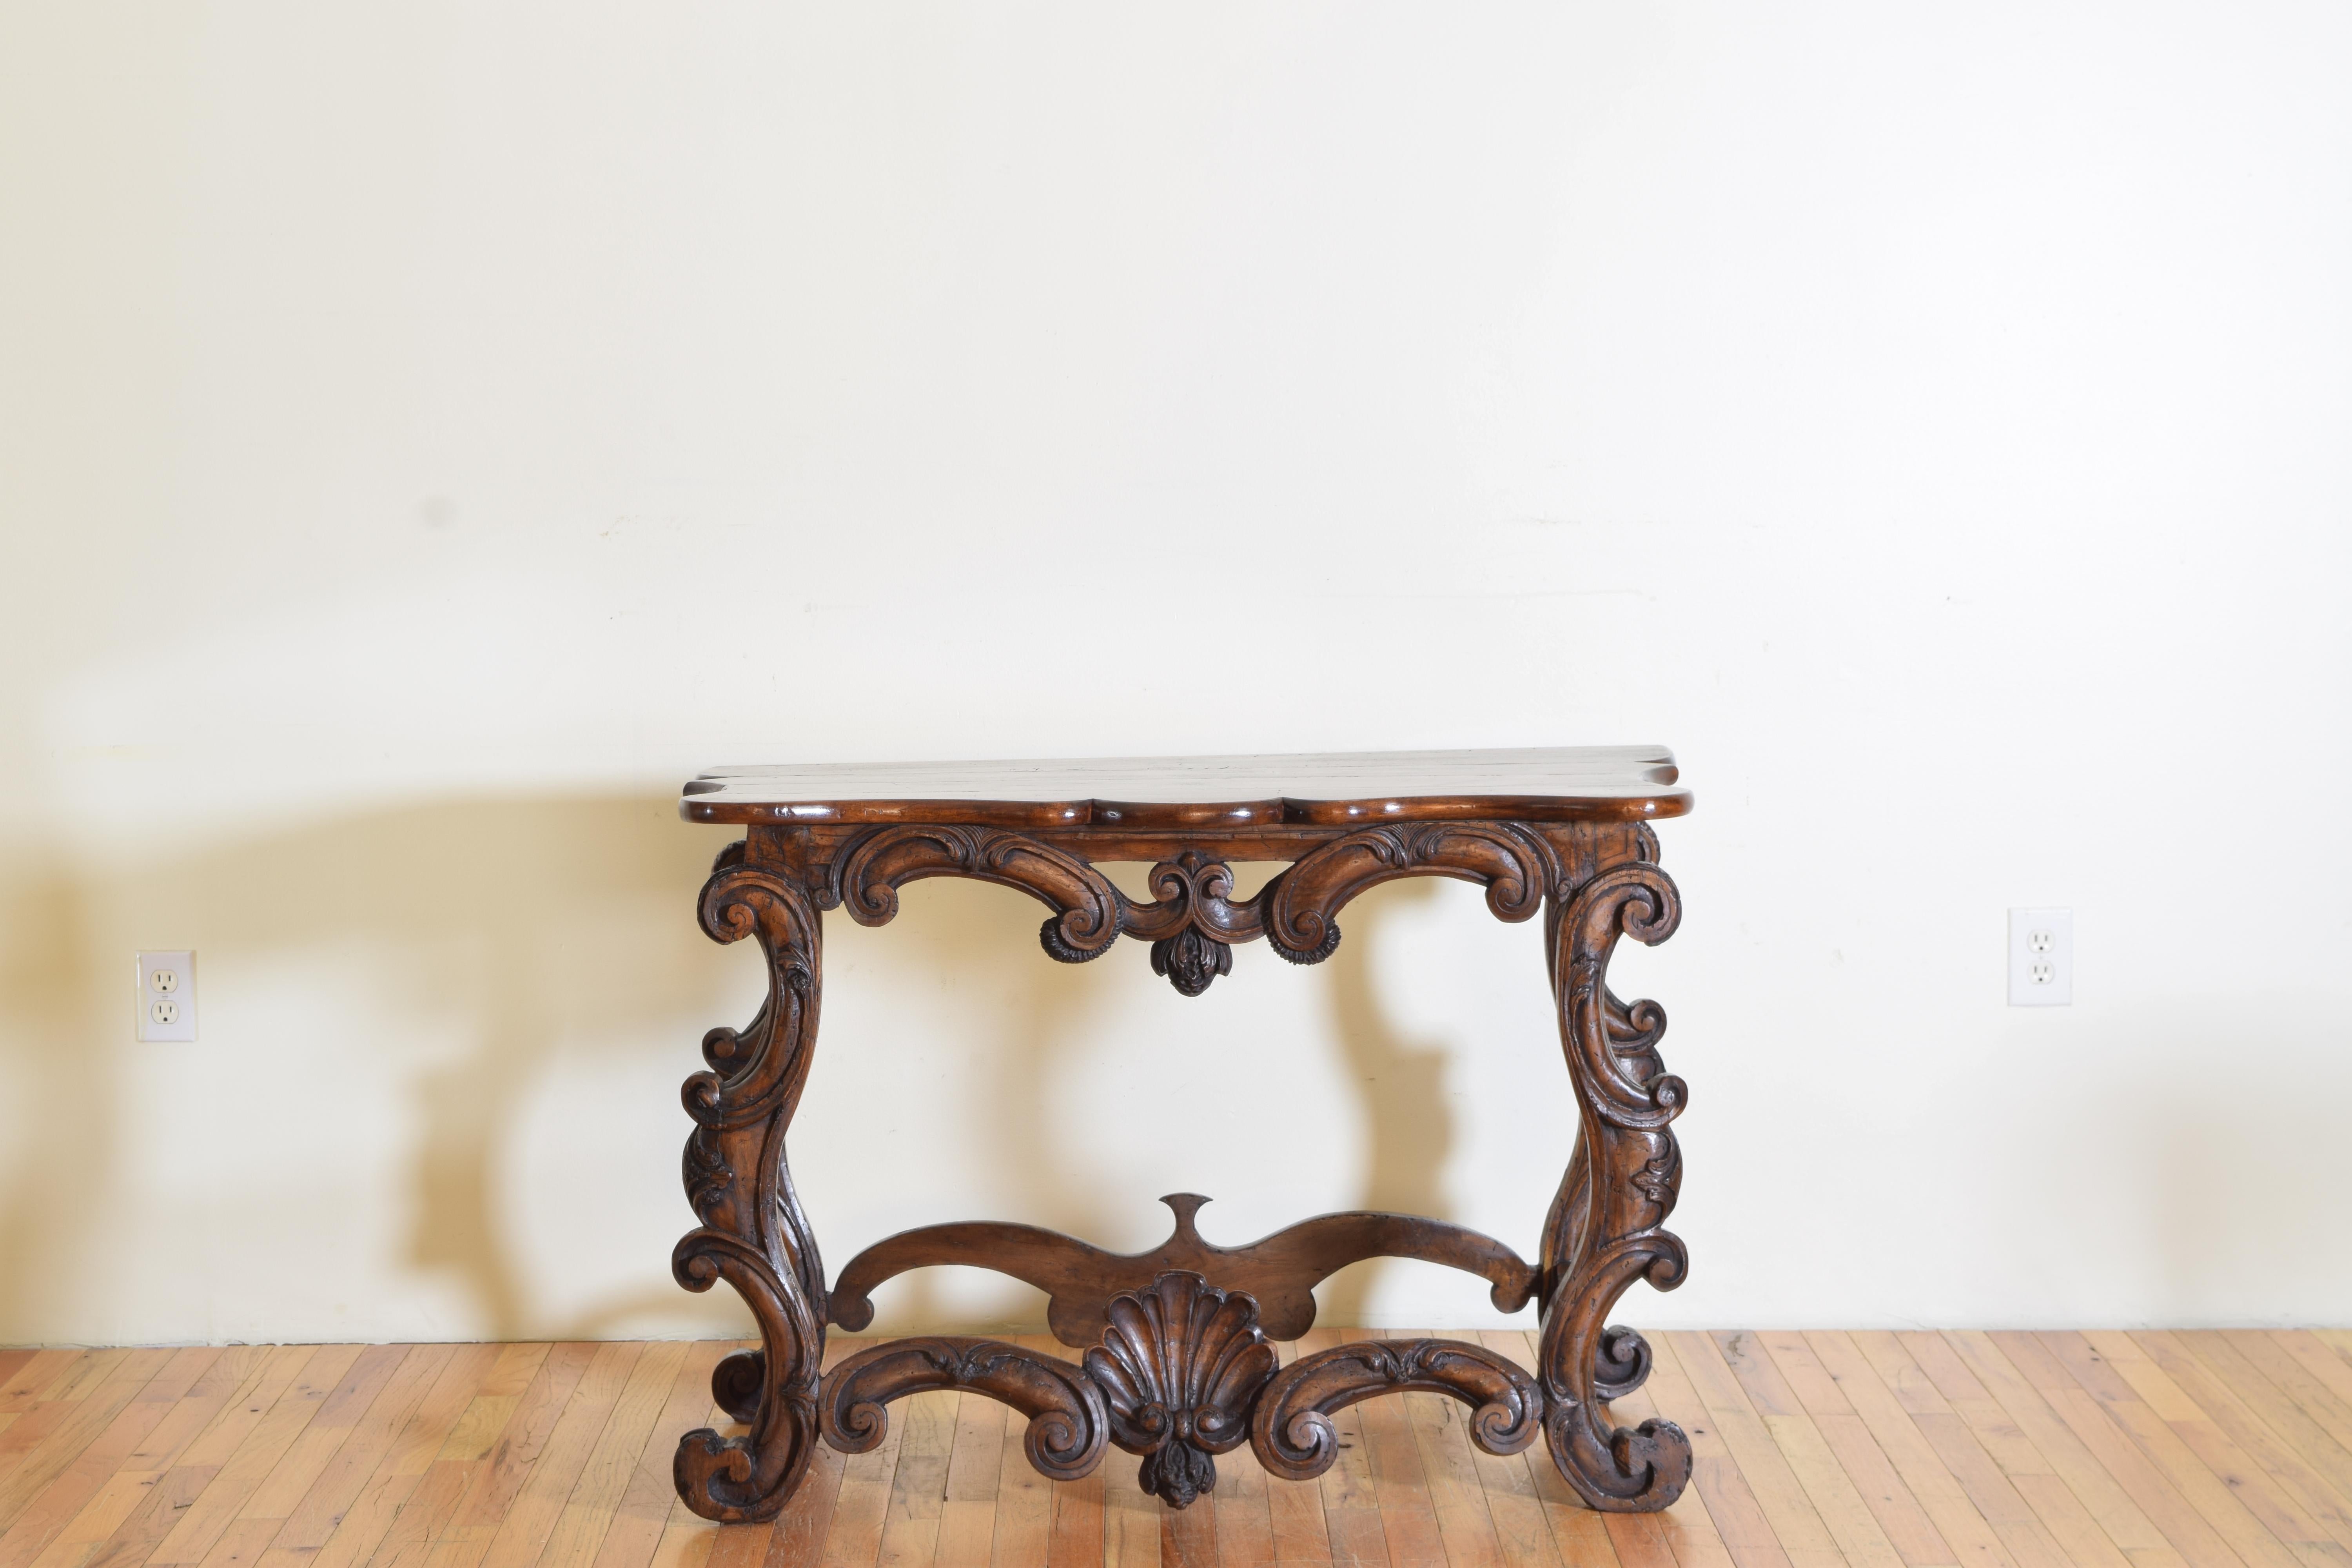 Having a later walnut top with curved sides and a serpentine shaped front above a conforming frame carved from pinewood comprised of c-scrolls and centering a large carved shell.